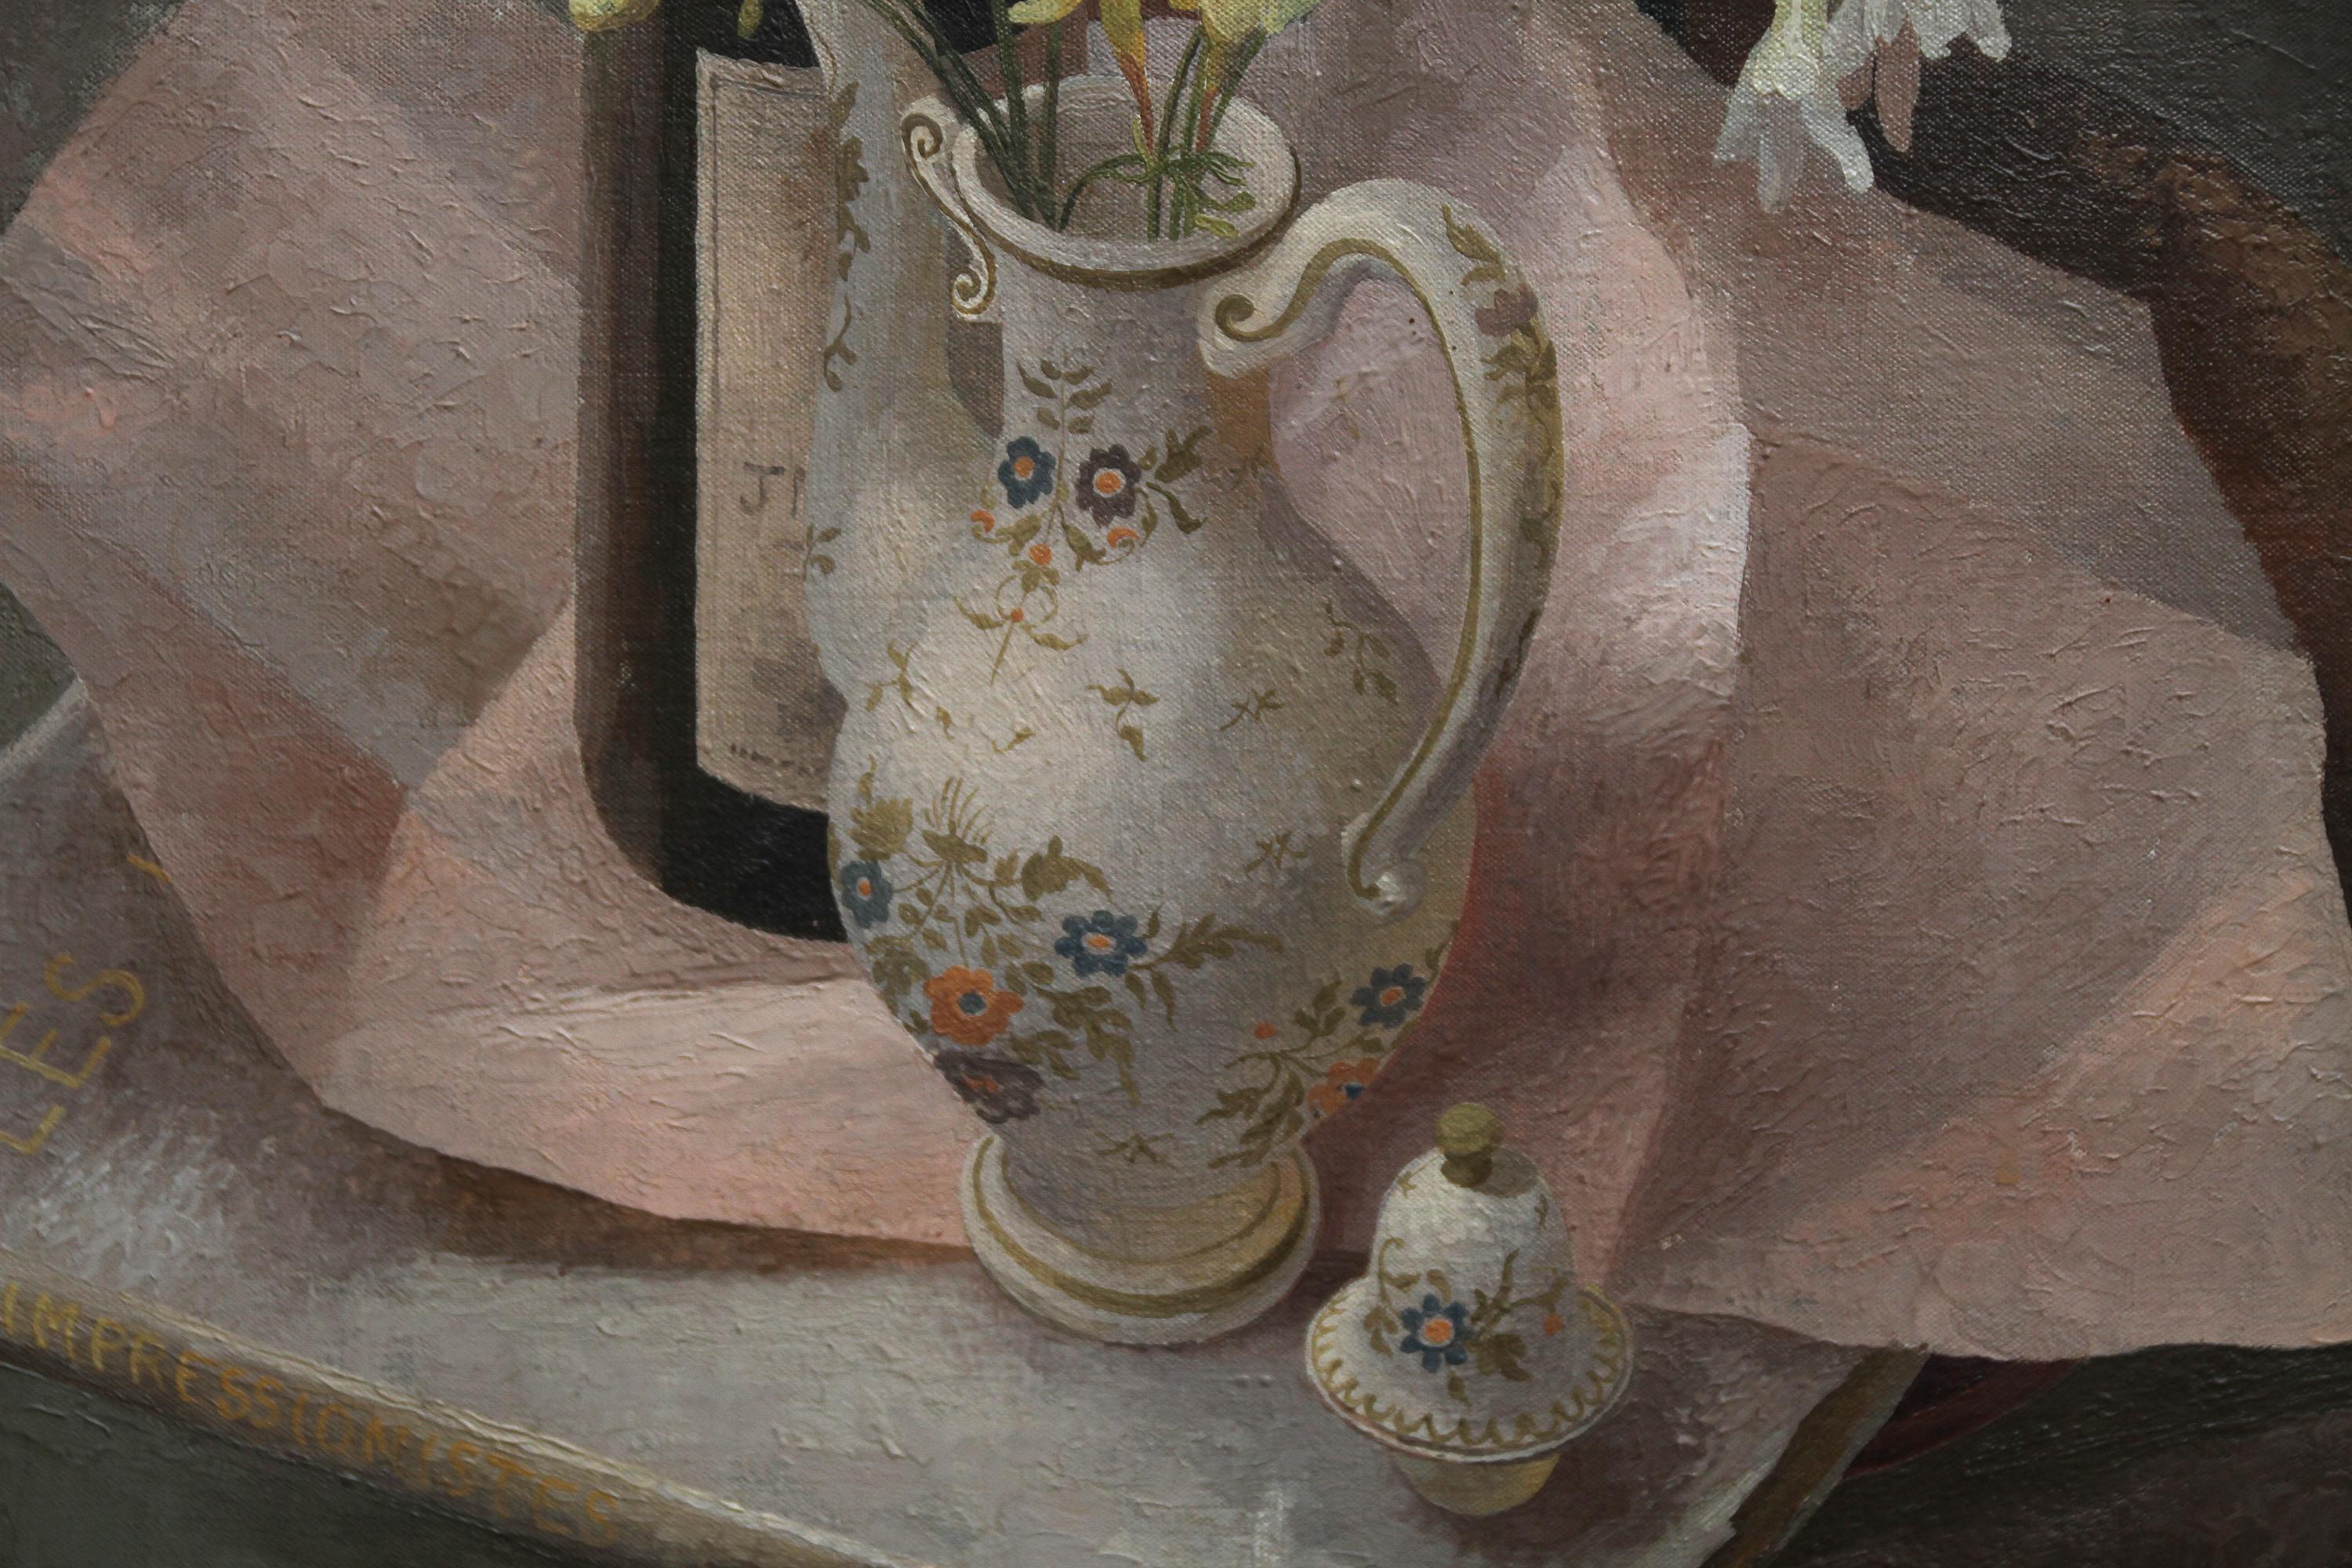 French Coffee Pot - British exh art 1960s floral still life oil painting flowers For Sale 1